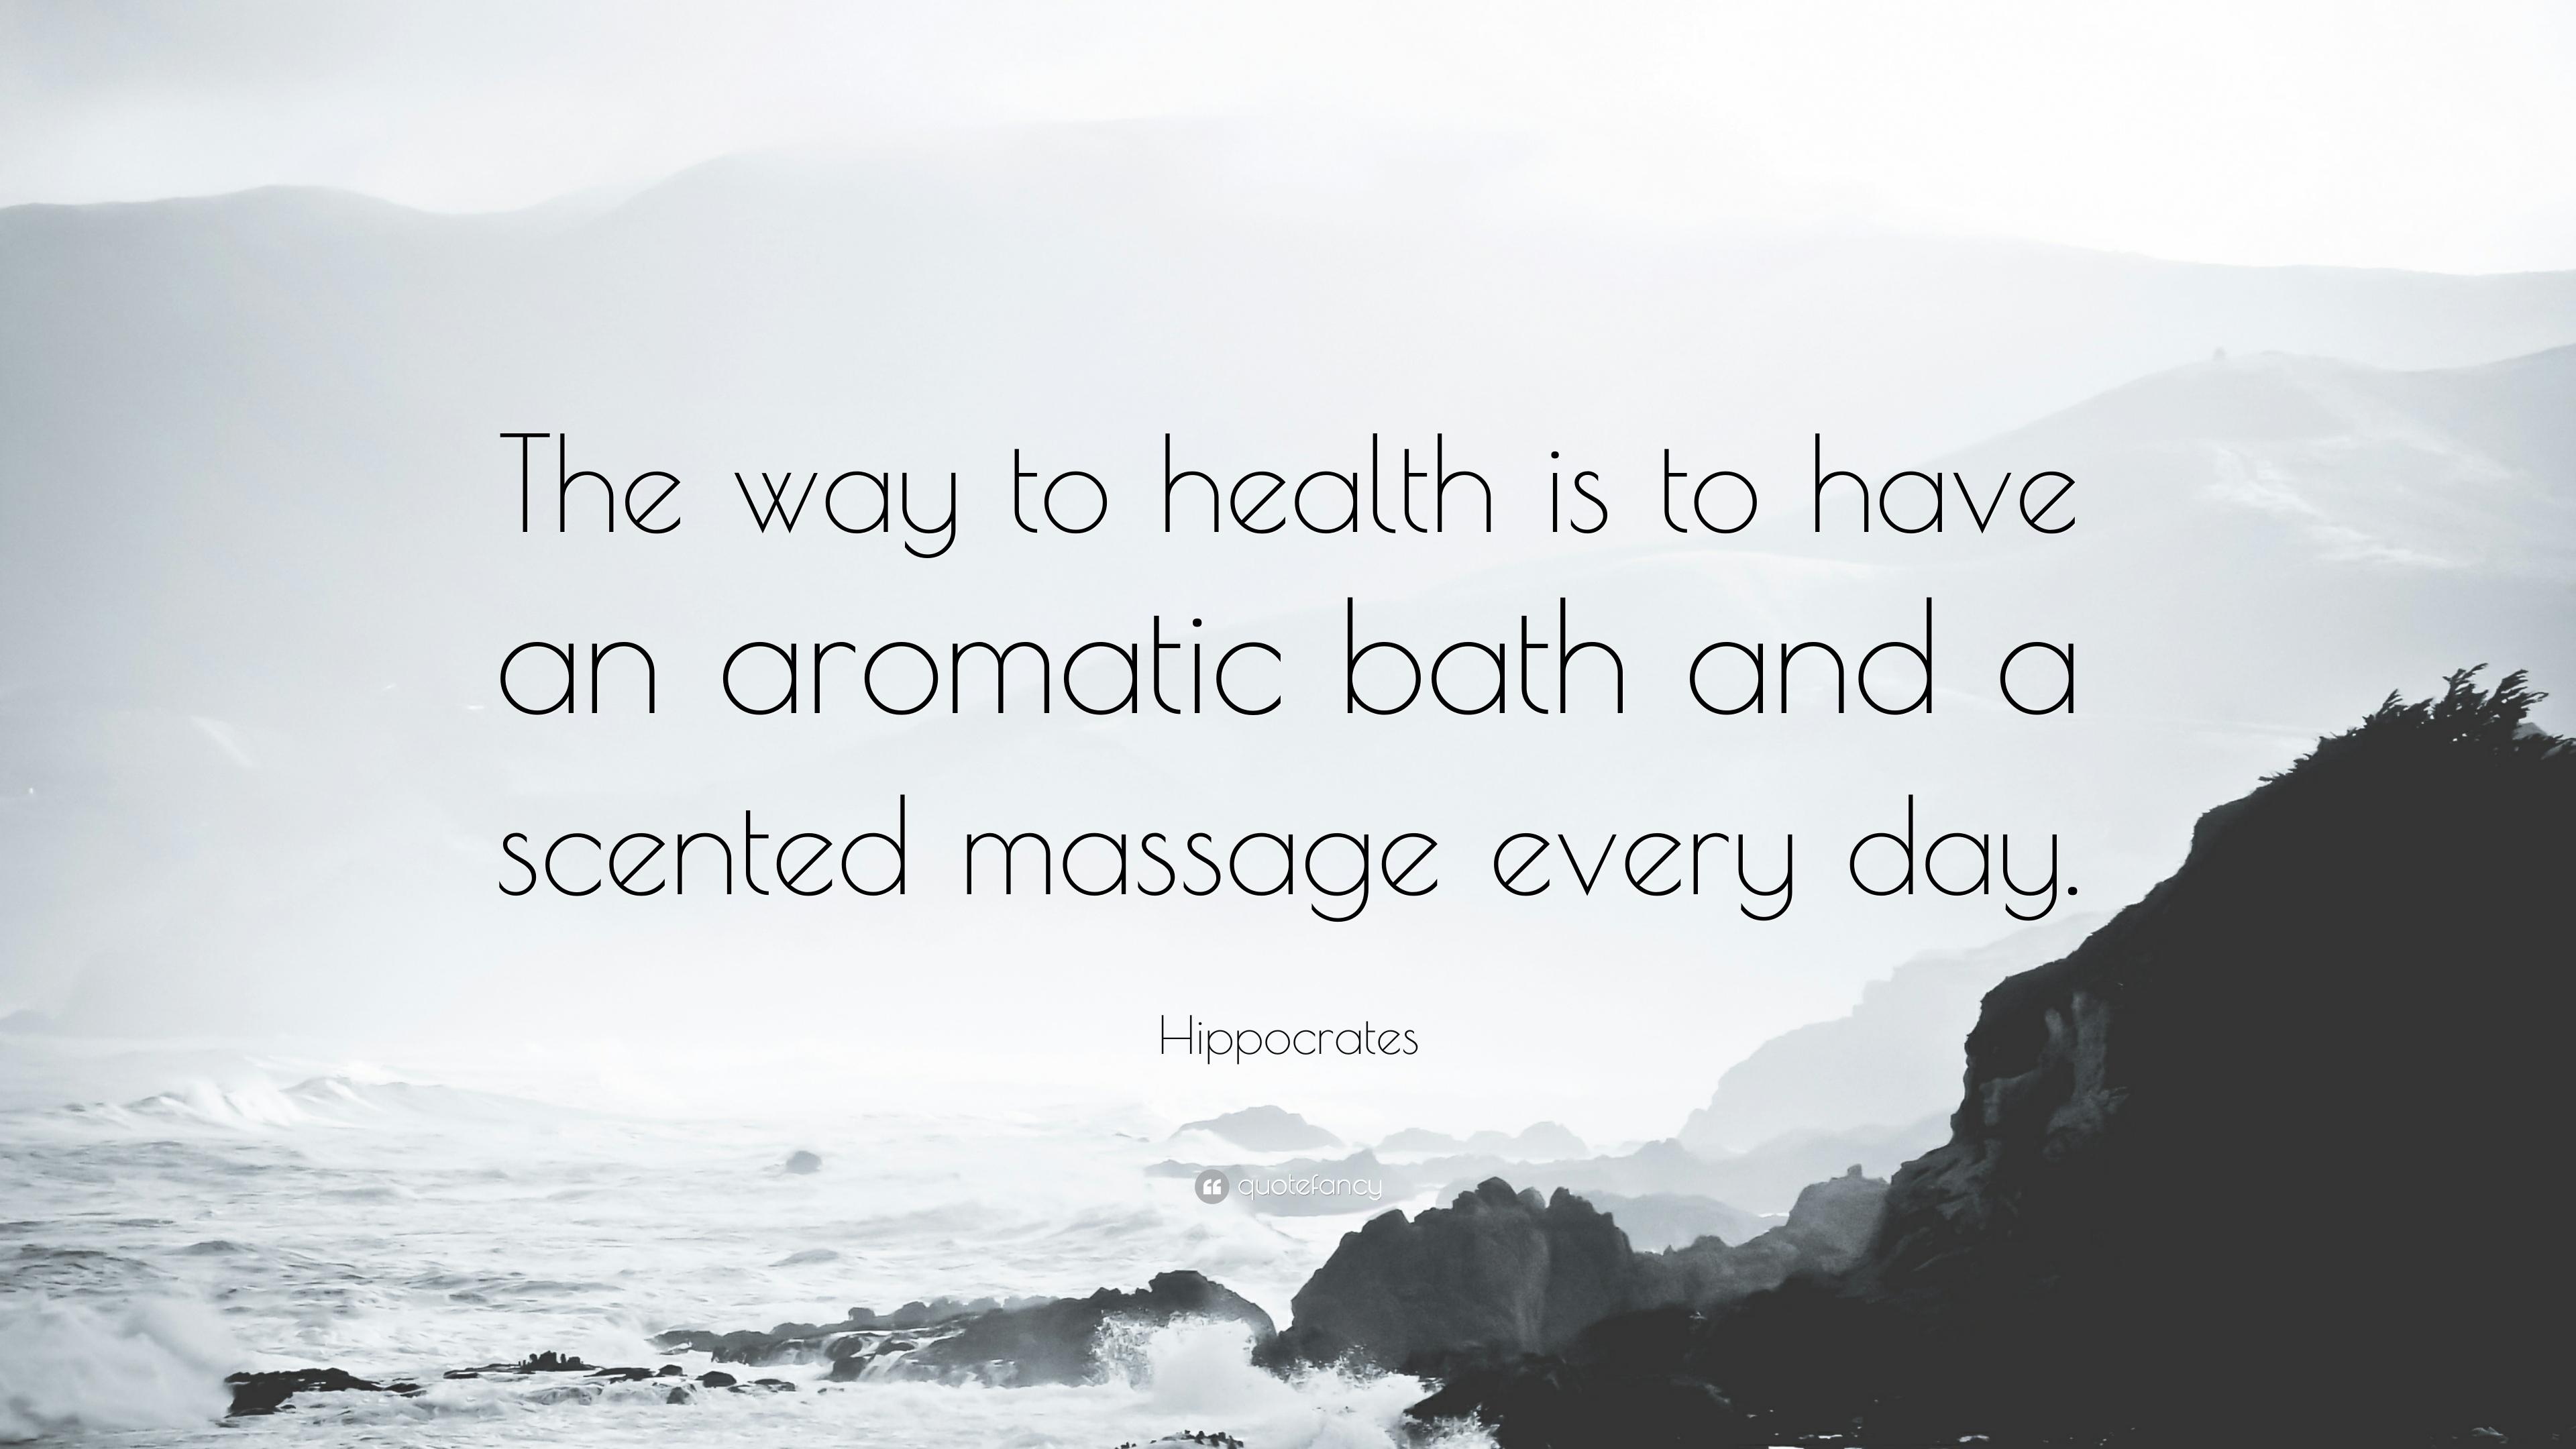 Hippocrates Quote: “The way to health is to have an aromatic bath